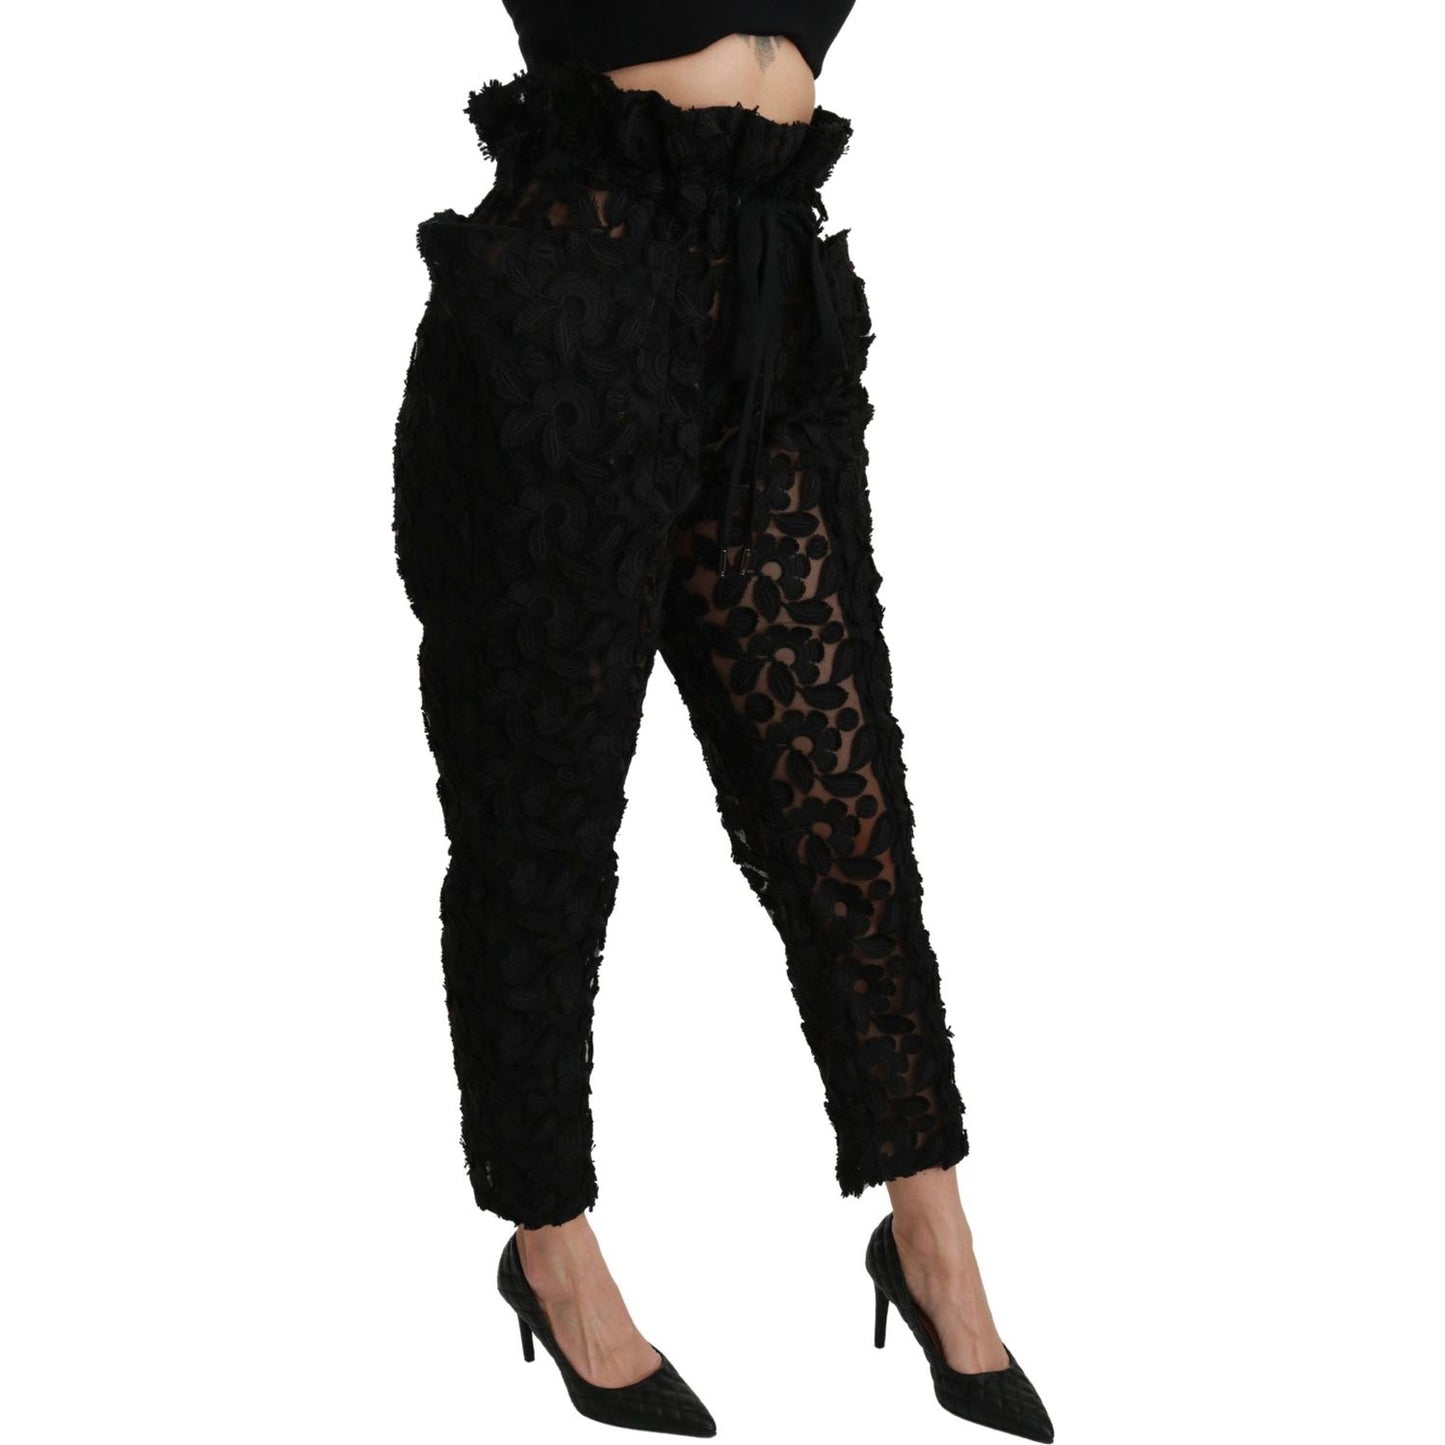 Dolce & Gabbana Chic Tapered High Waist Lace Pants Jeans & Pants black-floral-lace-tapered-high-waist-pants